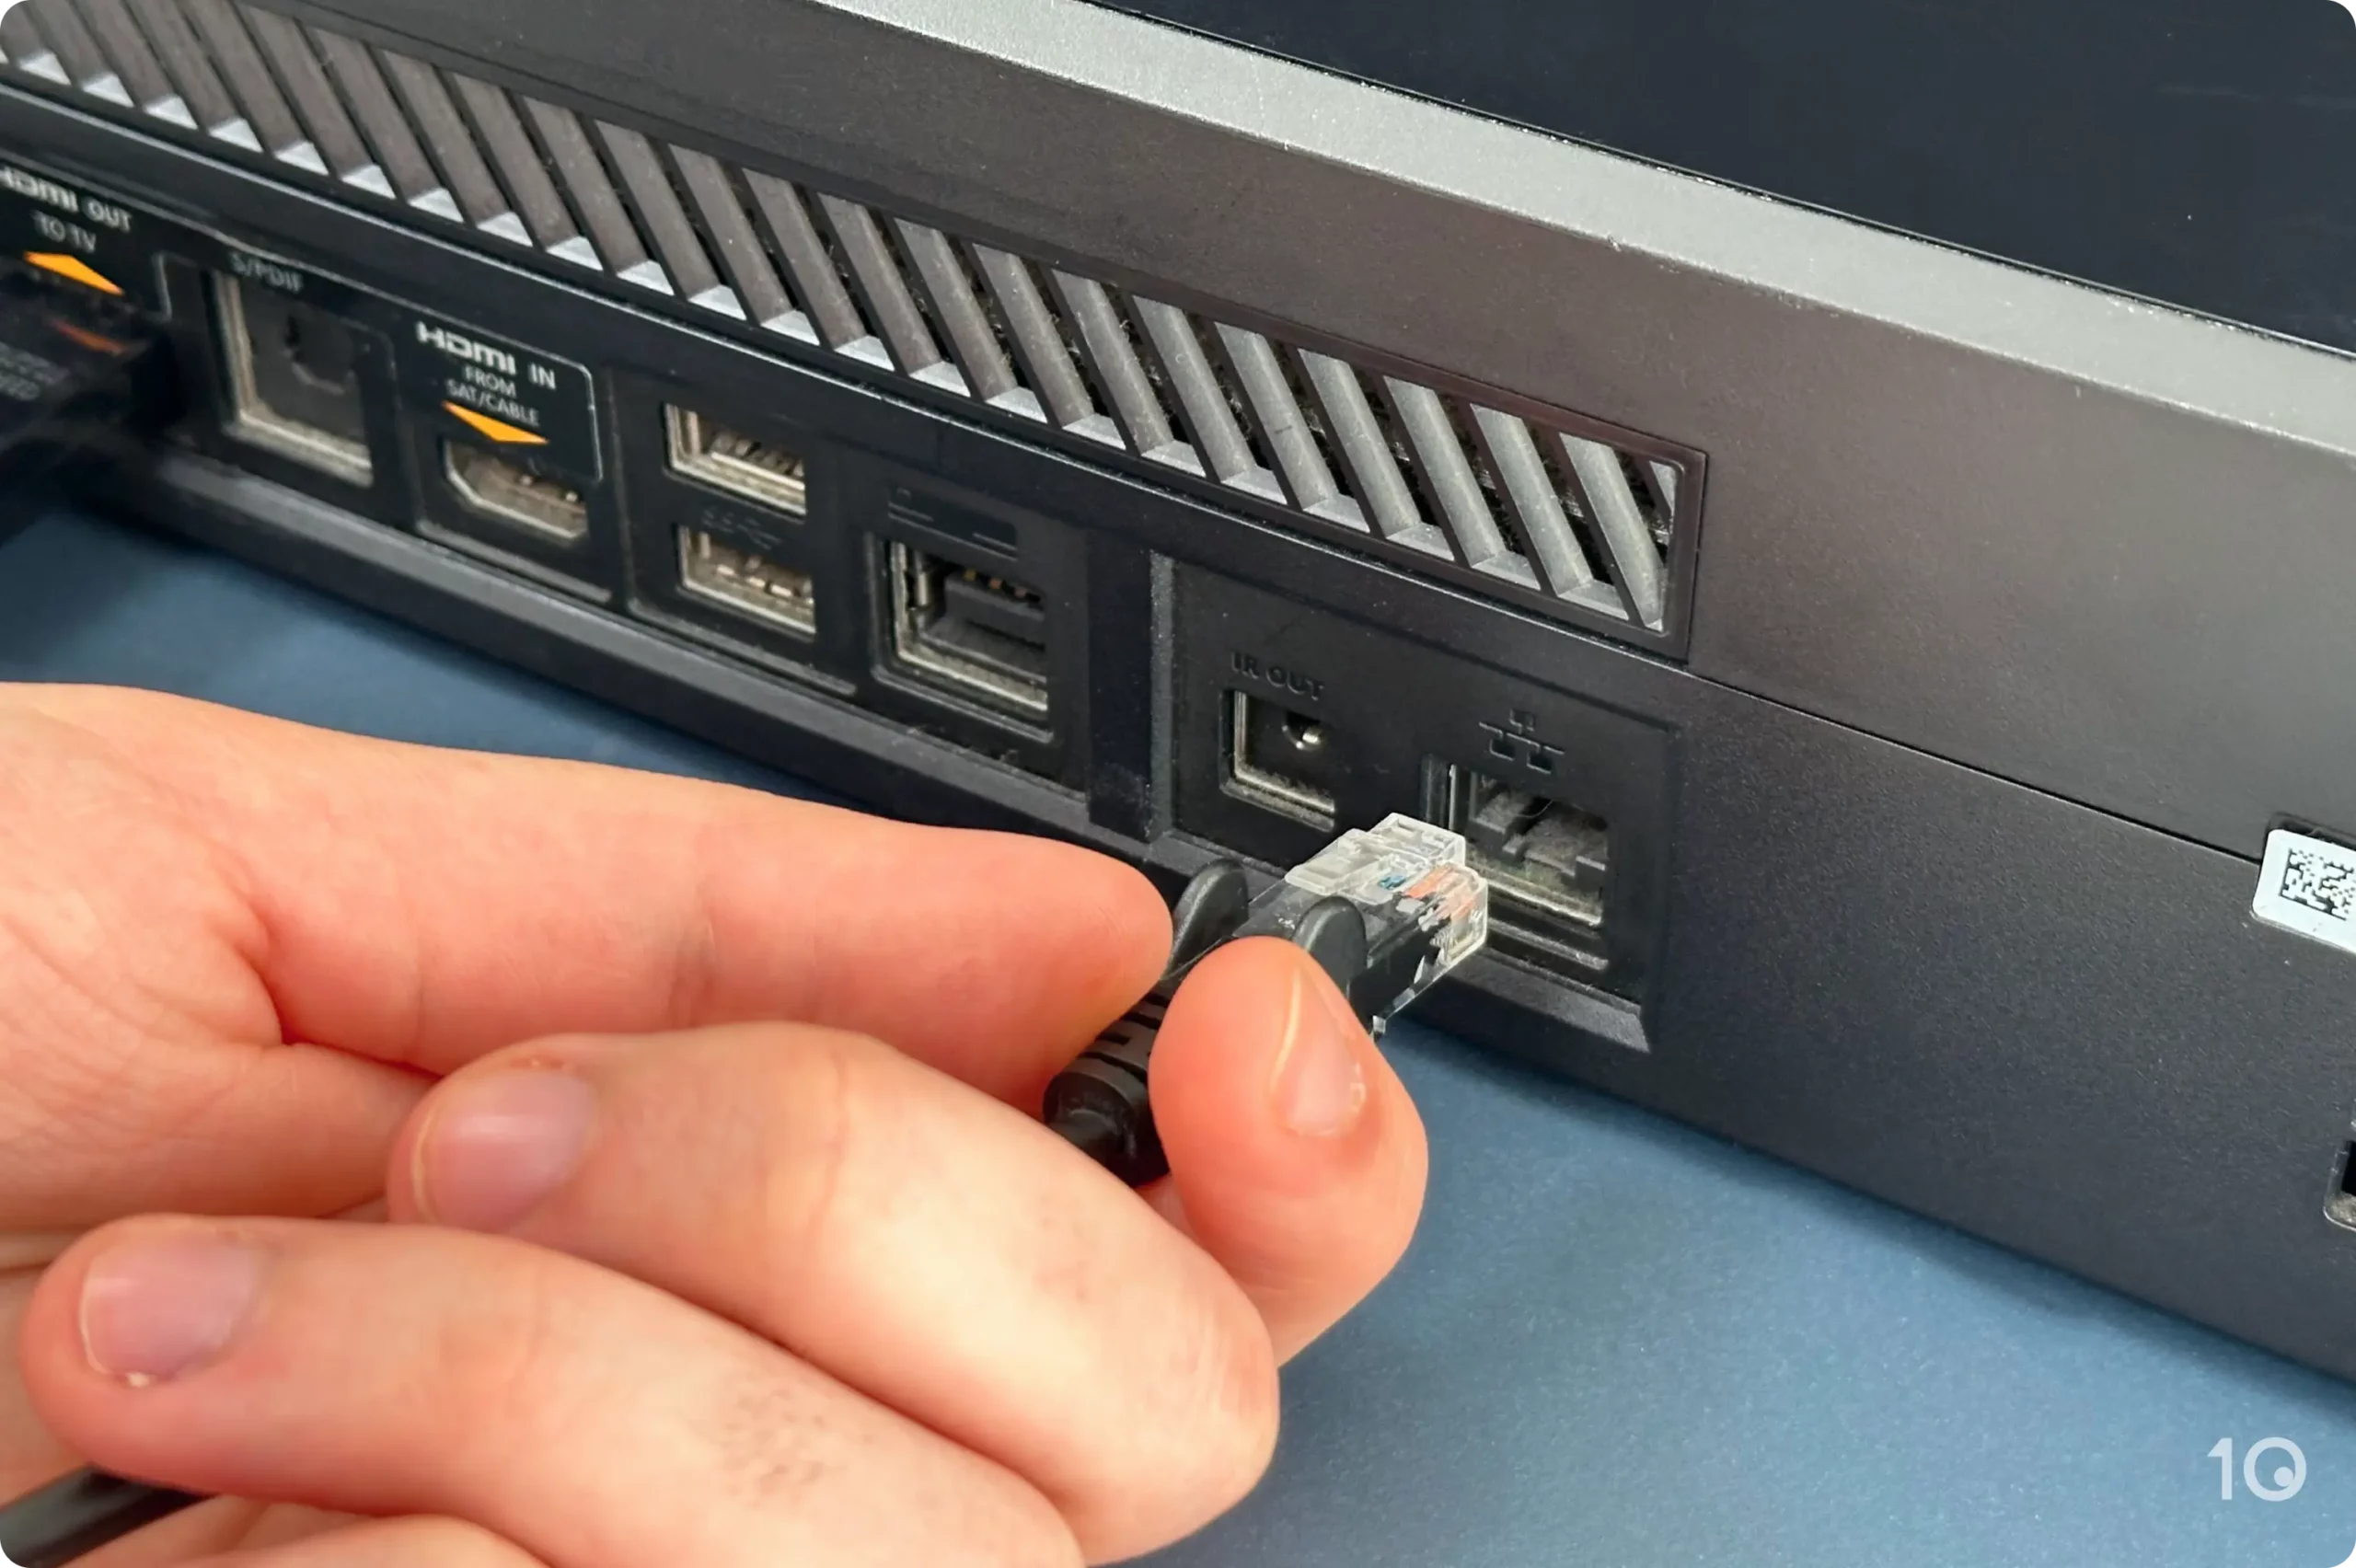 Connecting an ethernet cable to an Xbox